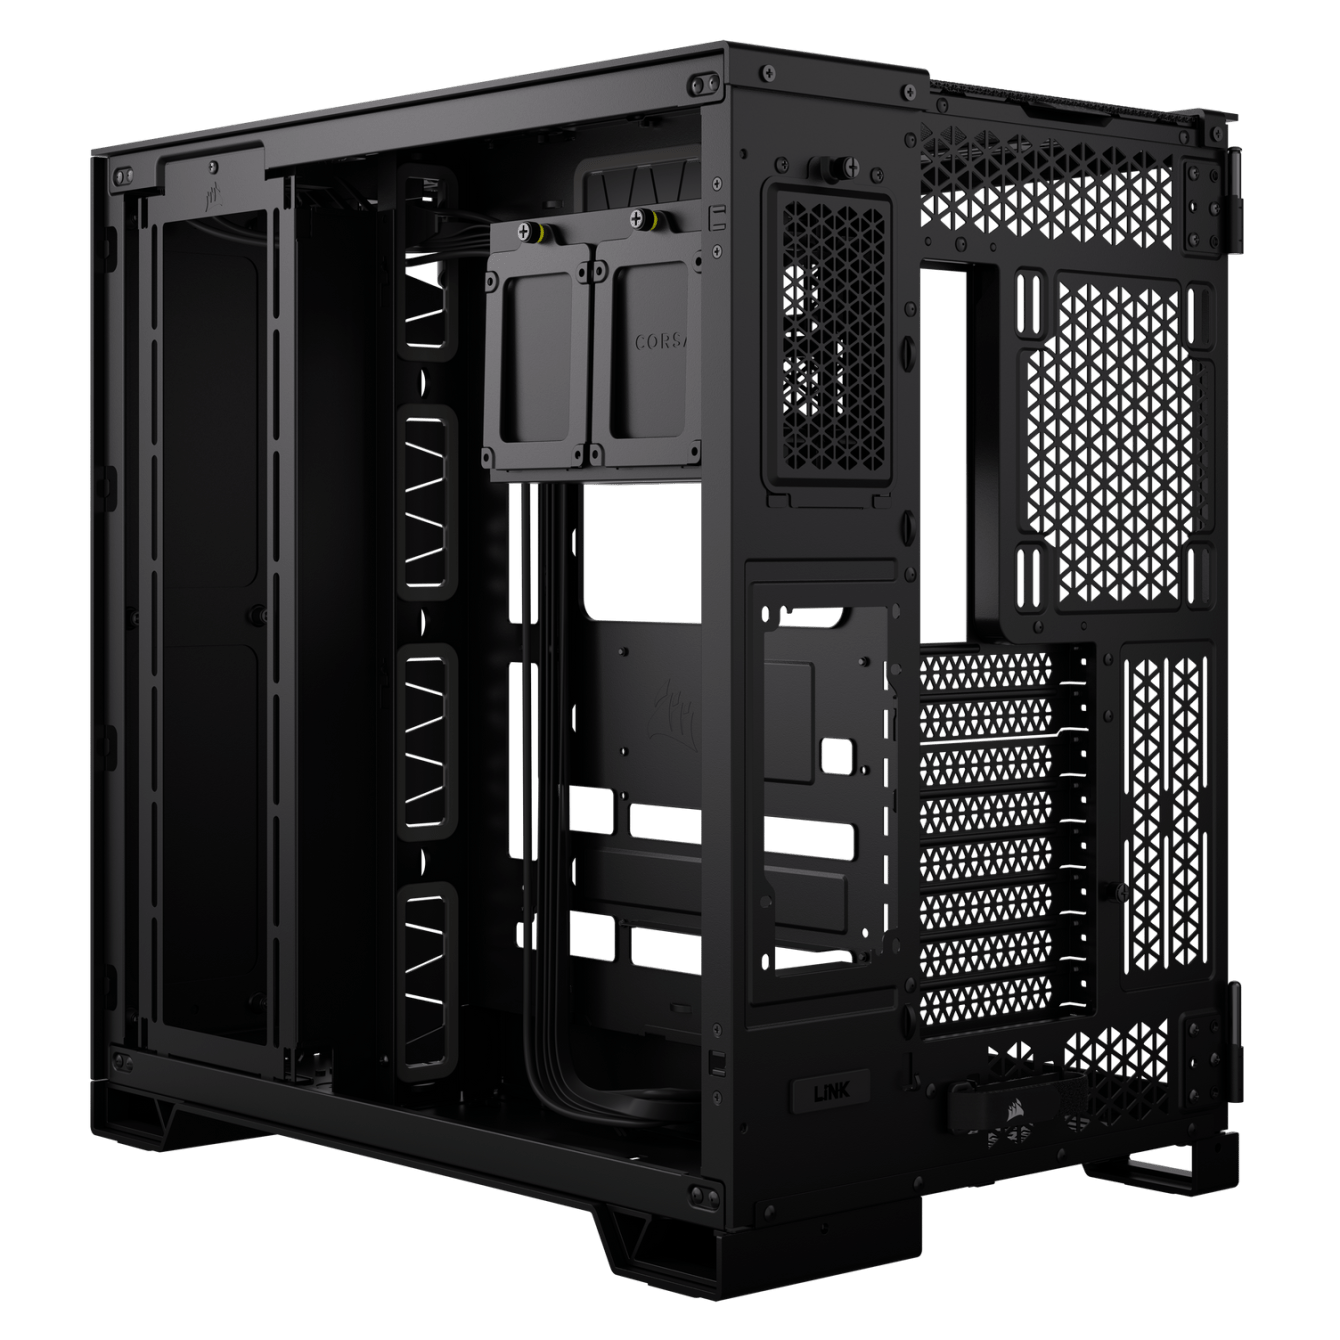 CORSAIR revolutionizes design with the new Dual Chamber PC Case Series